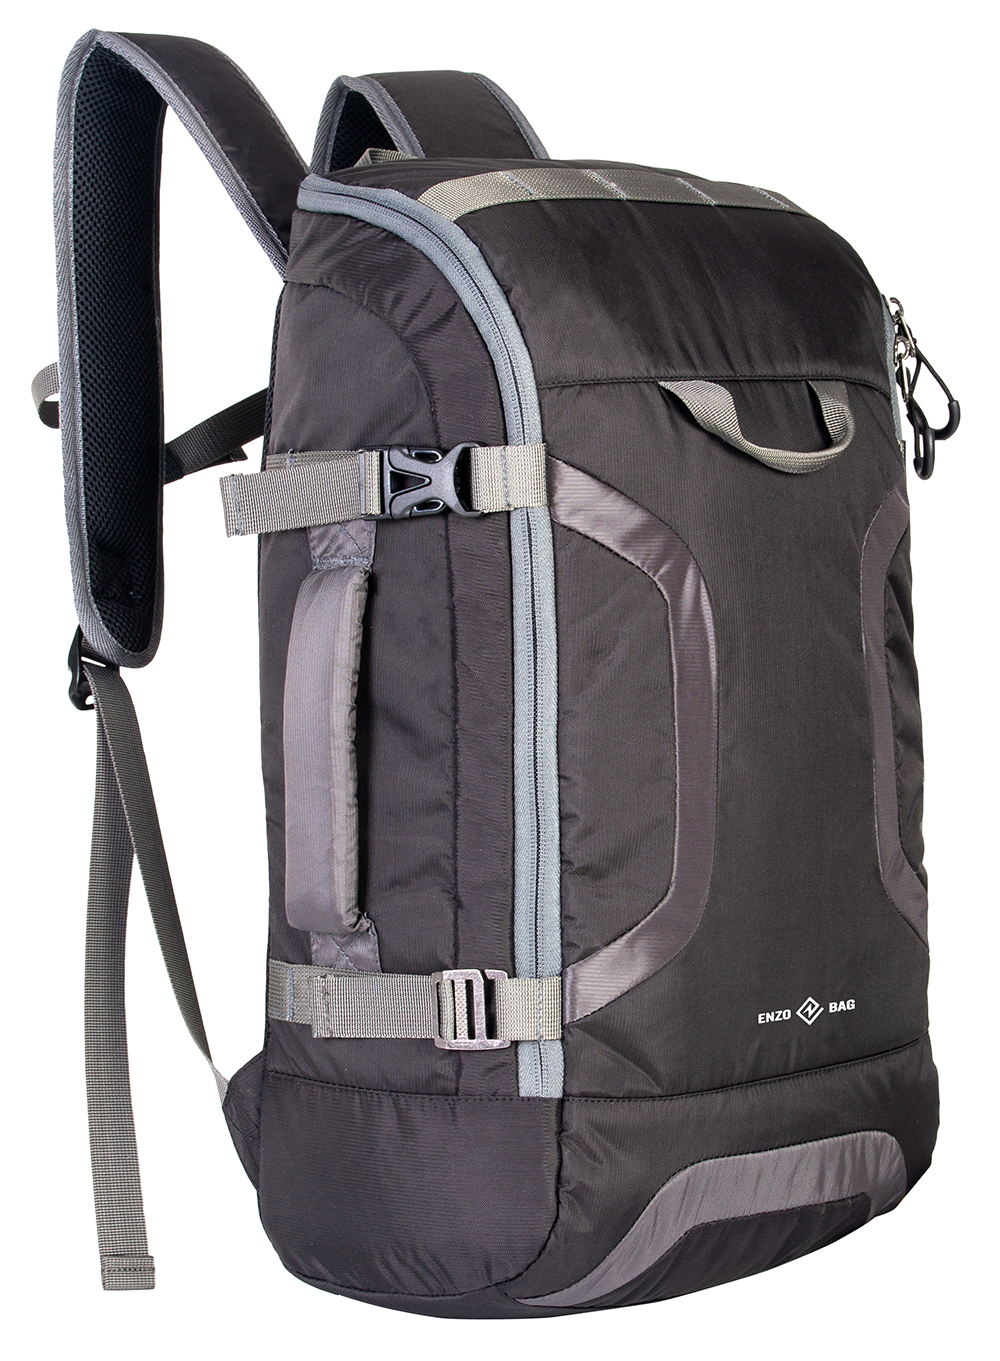 ISPO 1909 Day backpack for outdoor activity